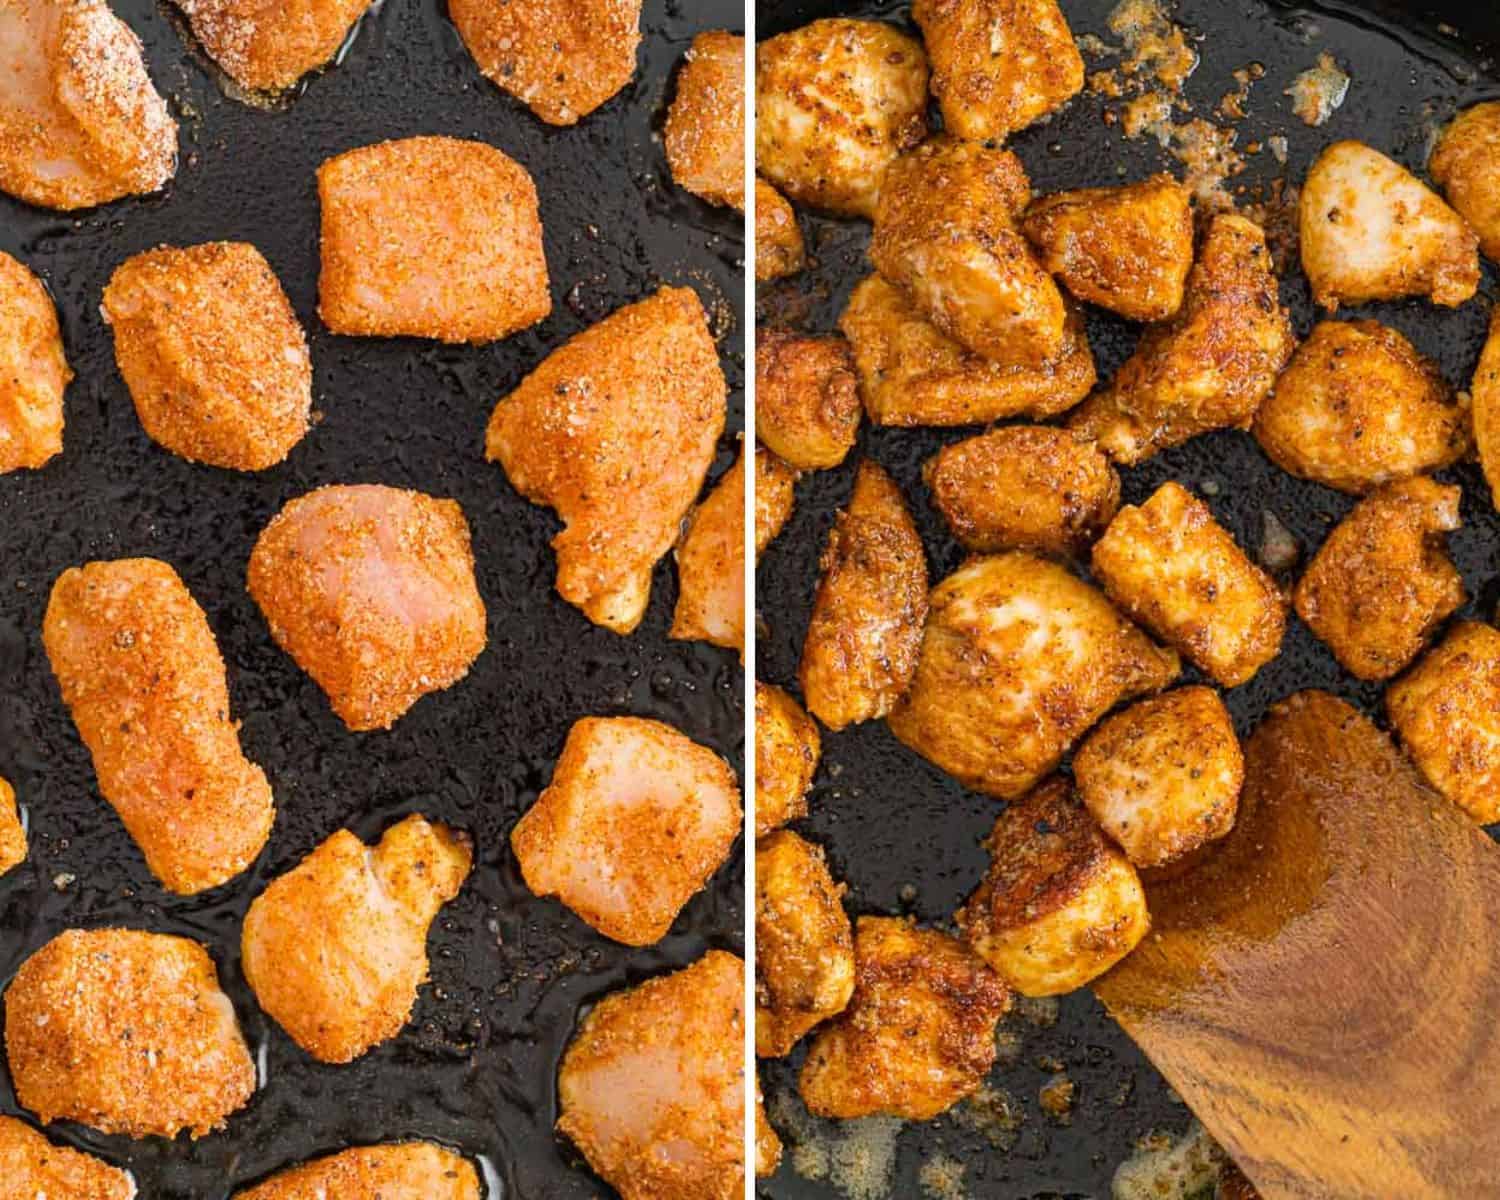 Chicken bites before and after cooking.